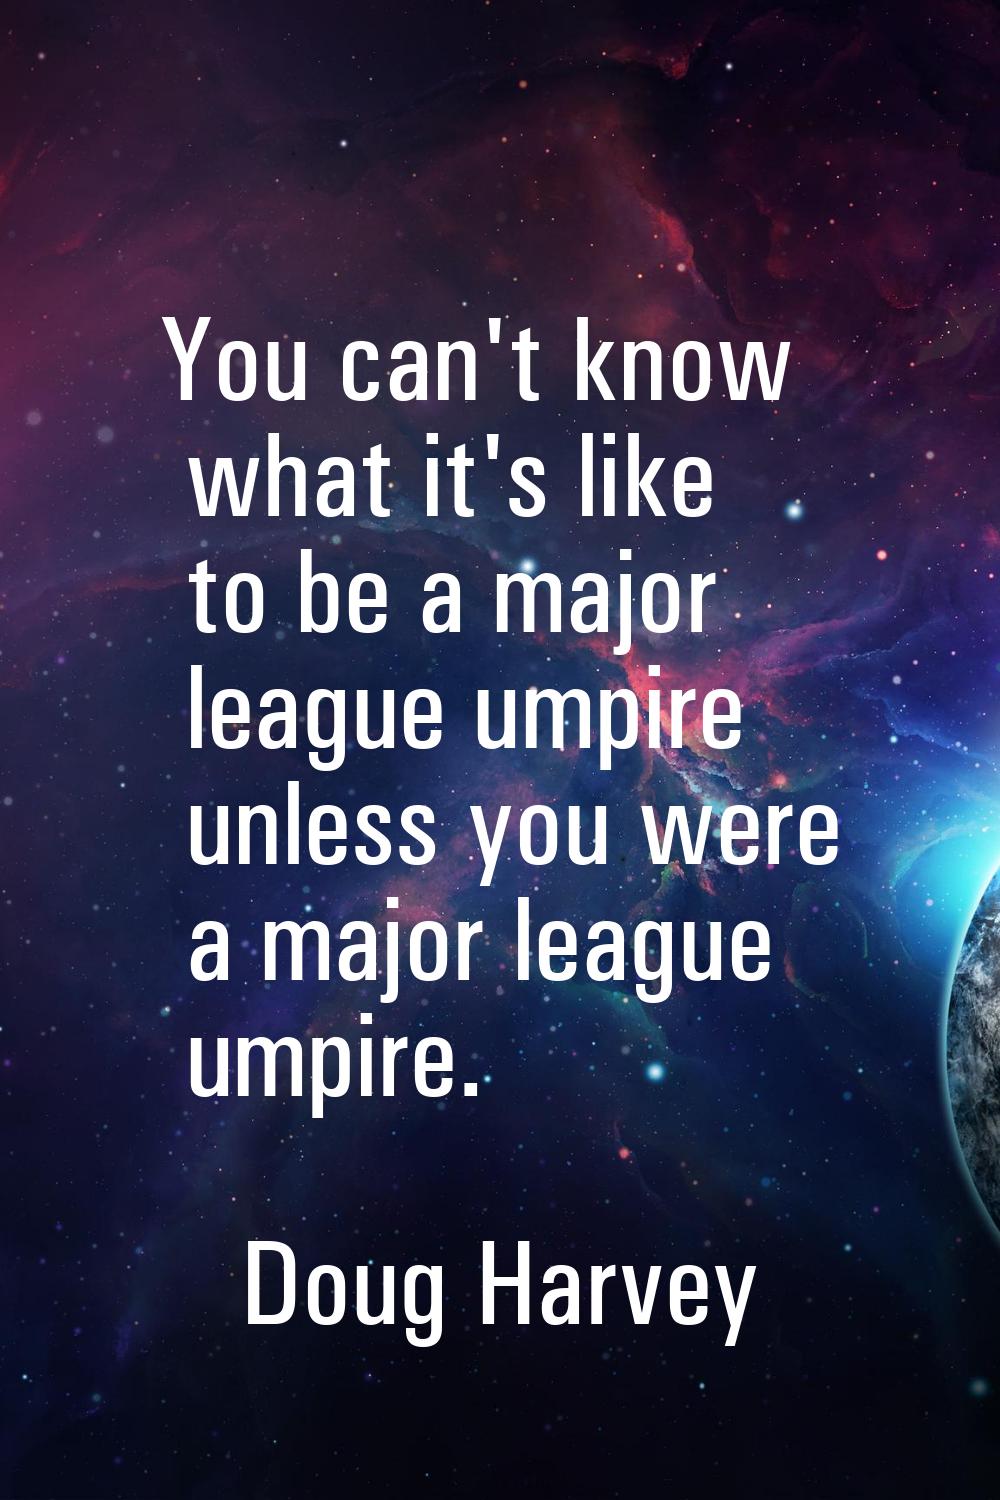 You can't know what it's like to be a major league umpire unless you were a major league umpire.